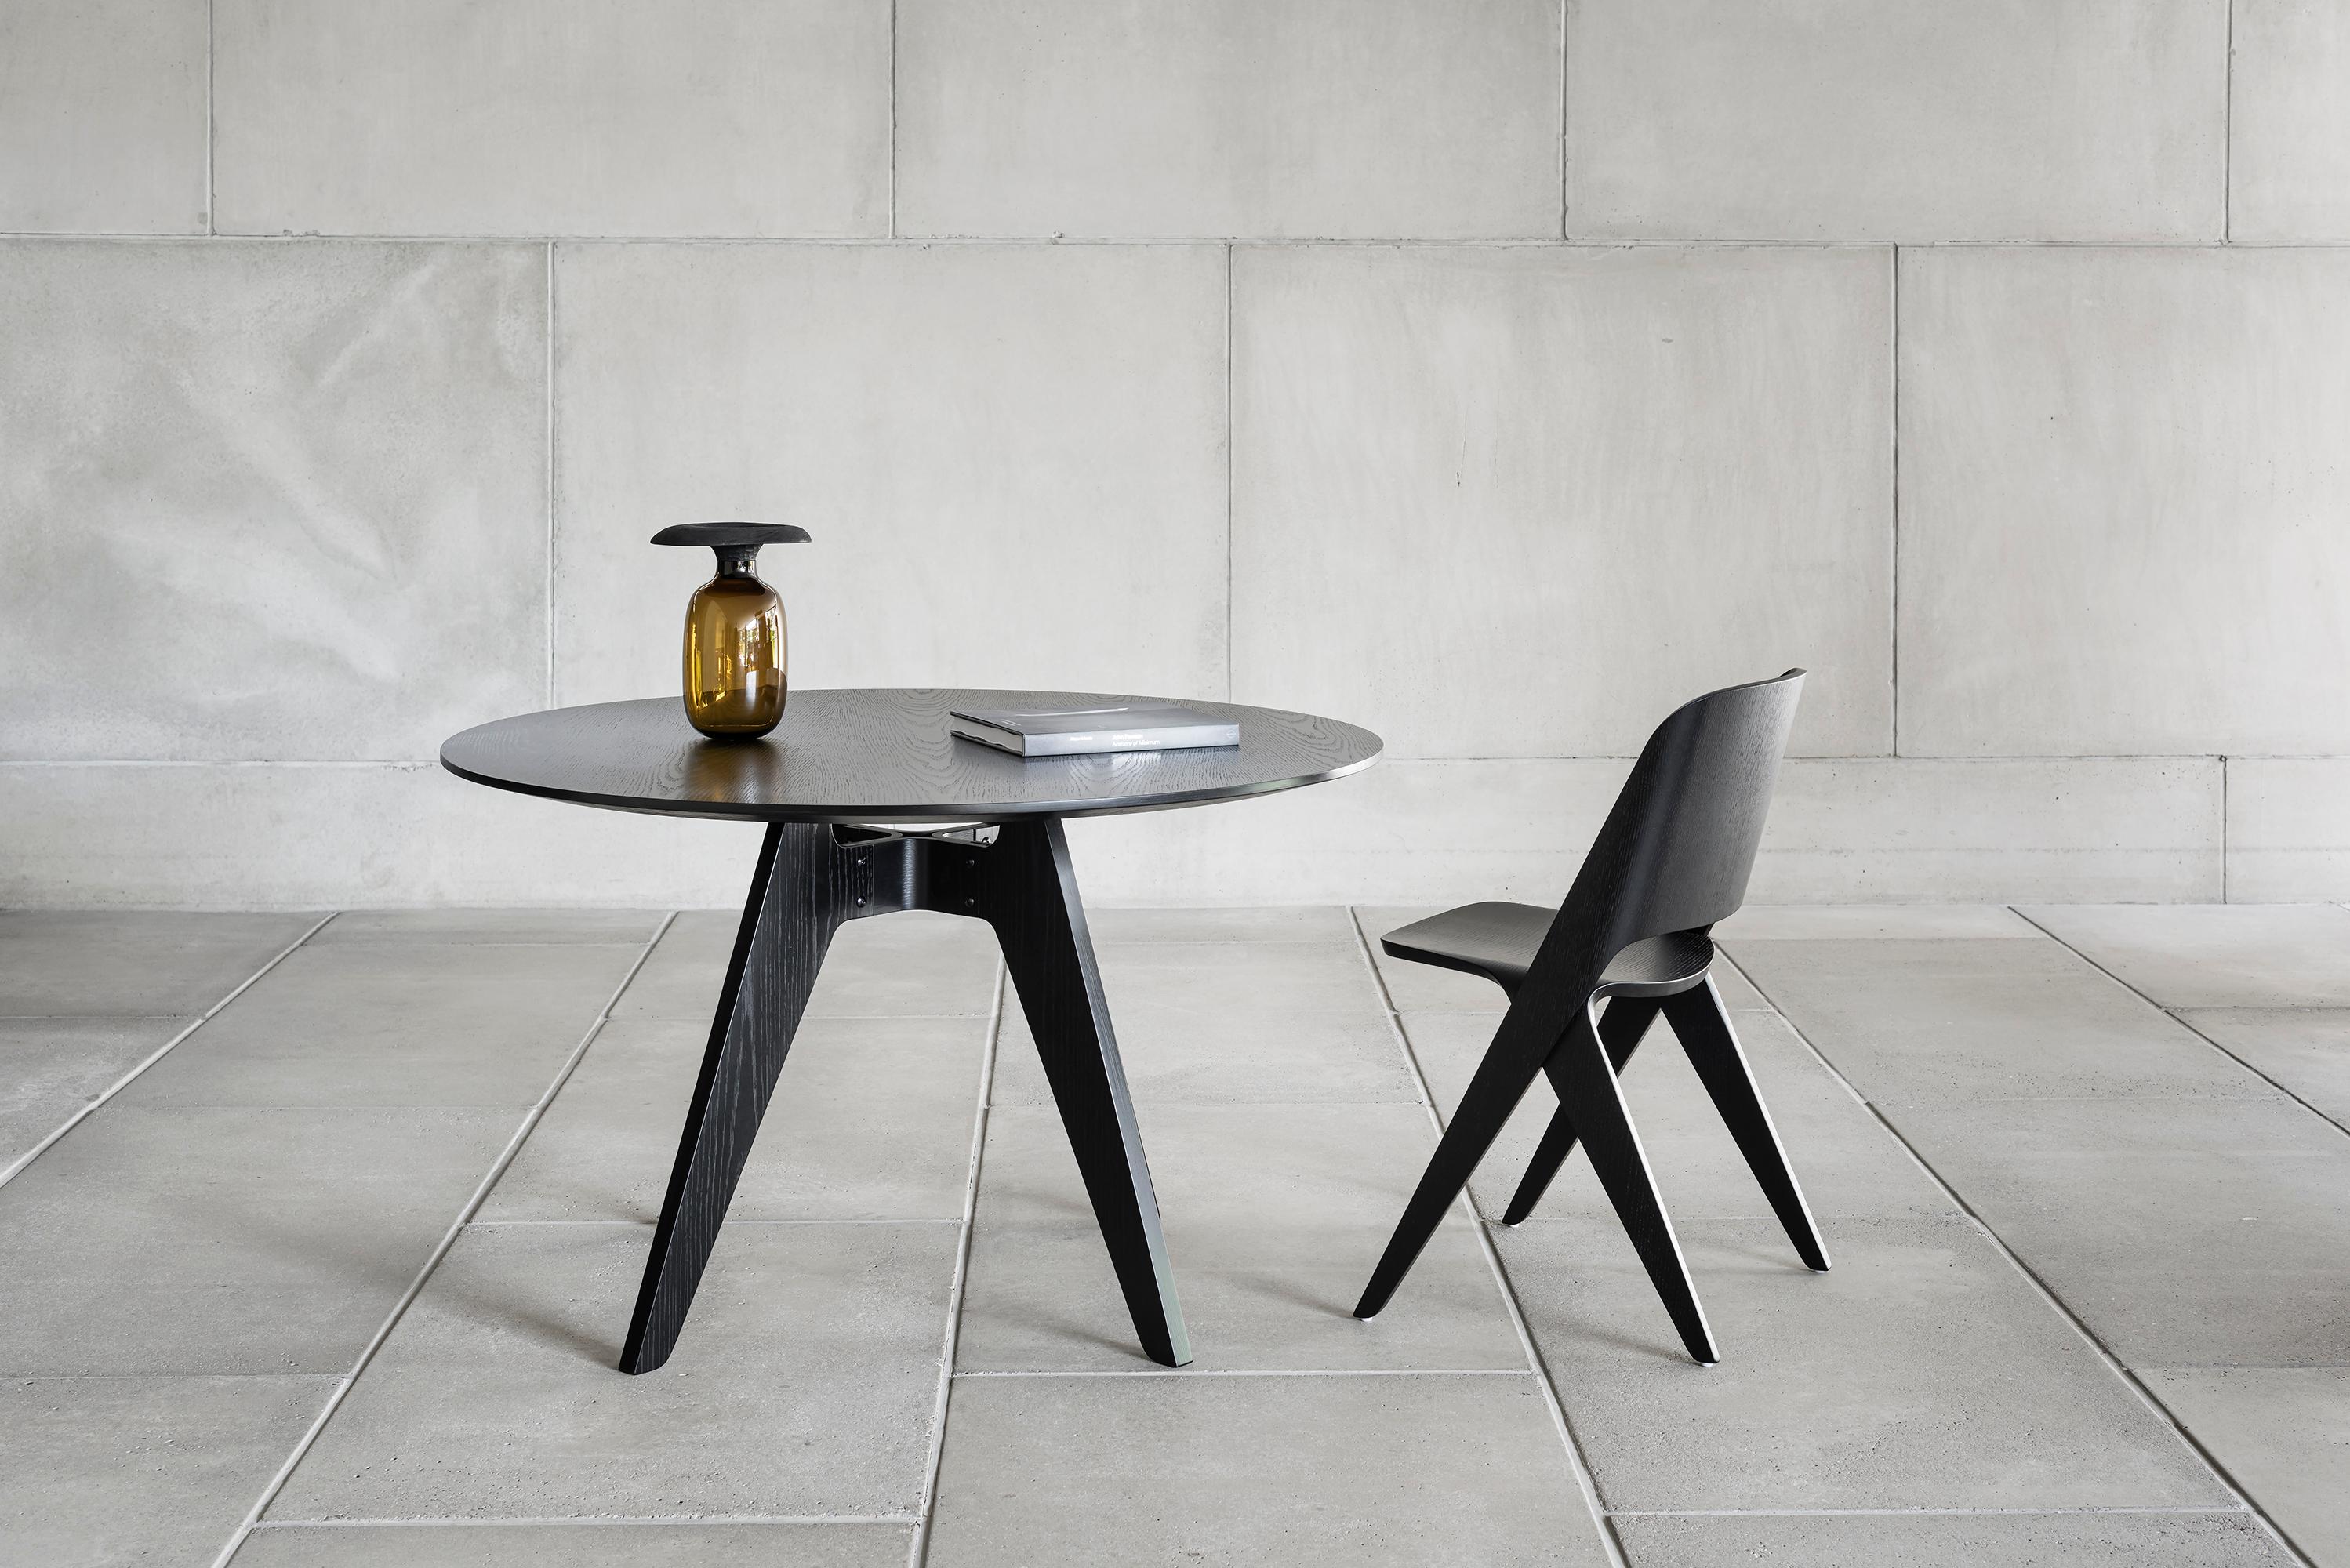 Lavitta round table (100 cm) designed by Timo Mikkonen & Antti Rouhunkoski
Collection Lavitta 2016 by Poiat 

Model shown on picture
Dimensions : H. 72 cm x D. 100 cm 
Color: black oak 
Three legs 

The Lavitta Collection draws upon the